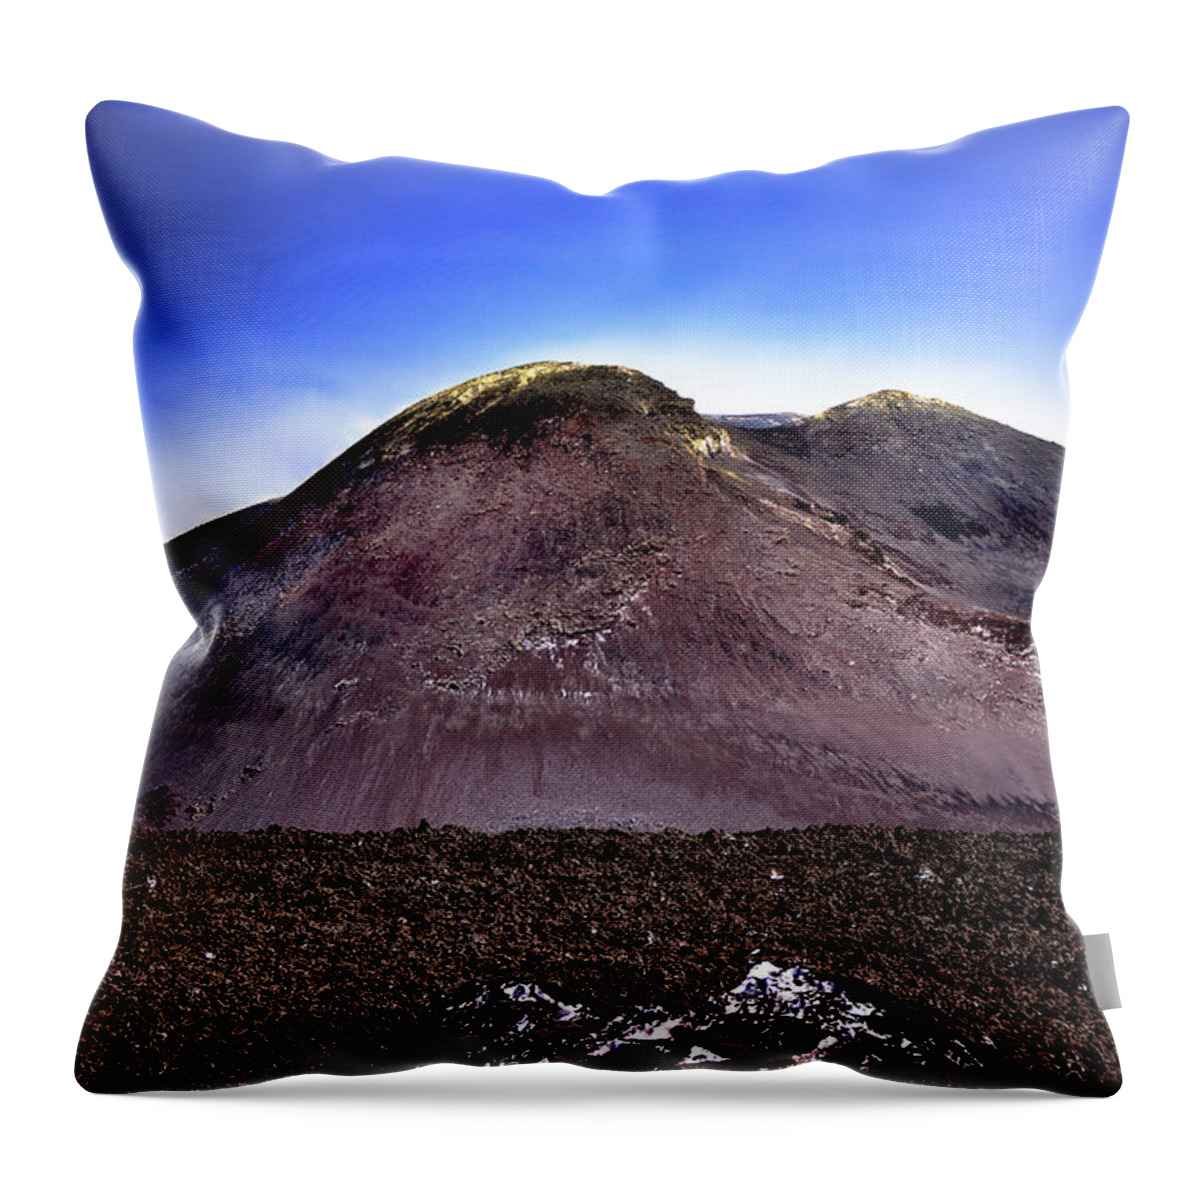  Throw Pillow featuring the photograph Mt. Etna III by Patrick Boening